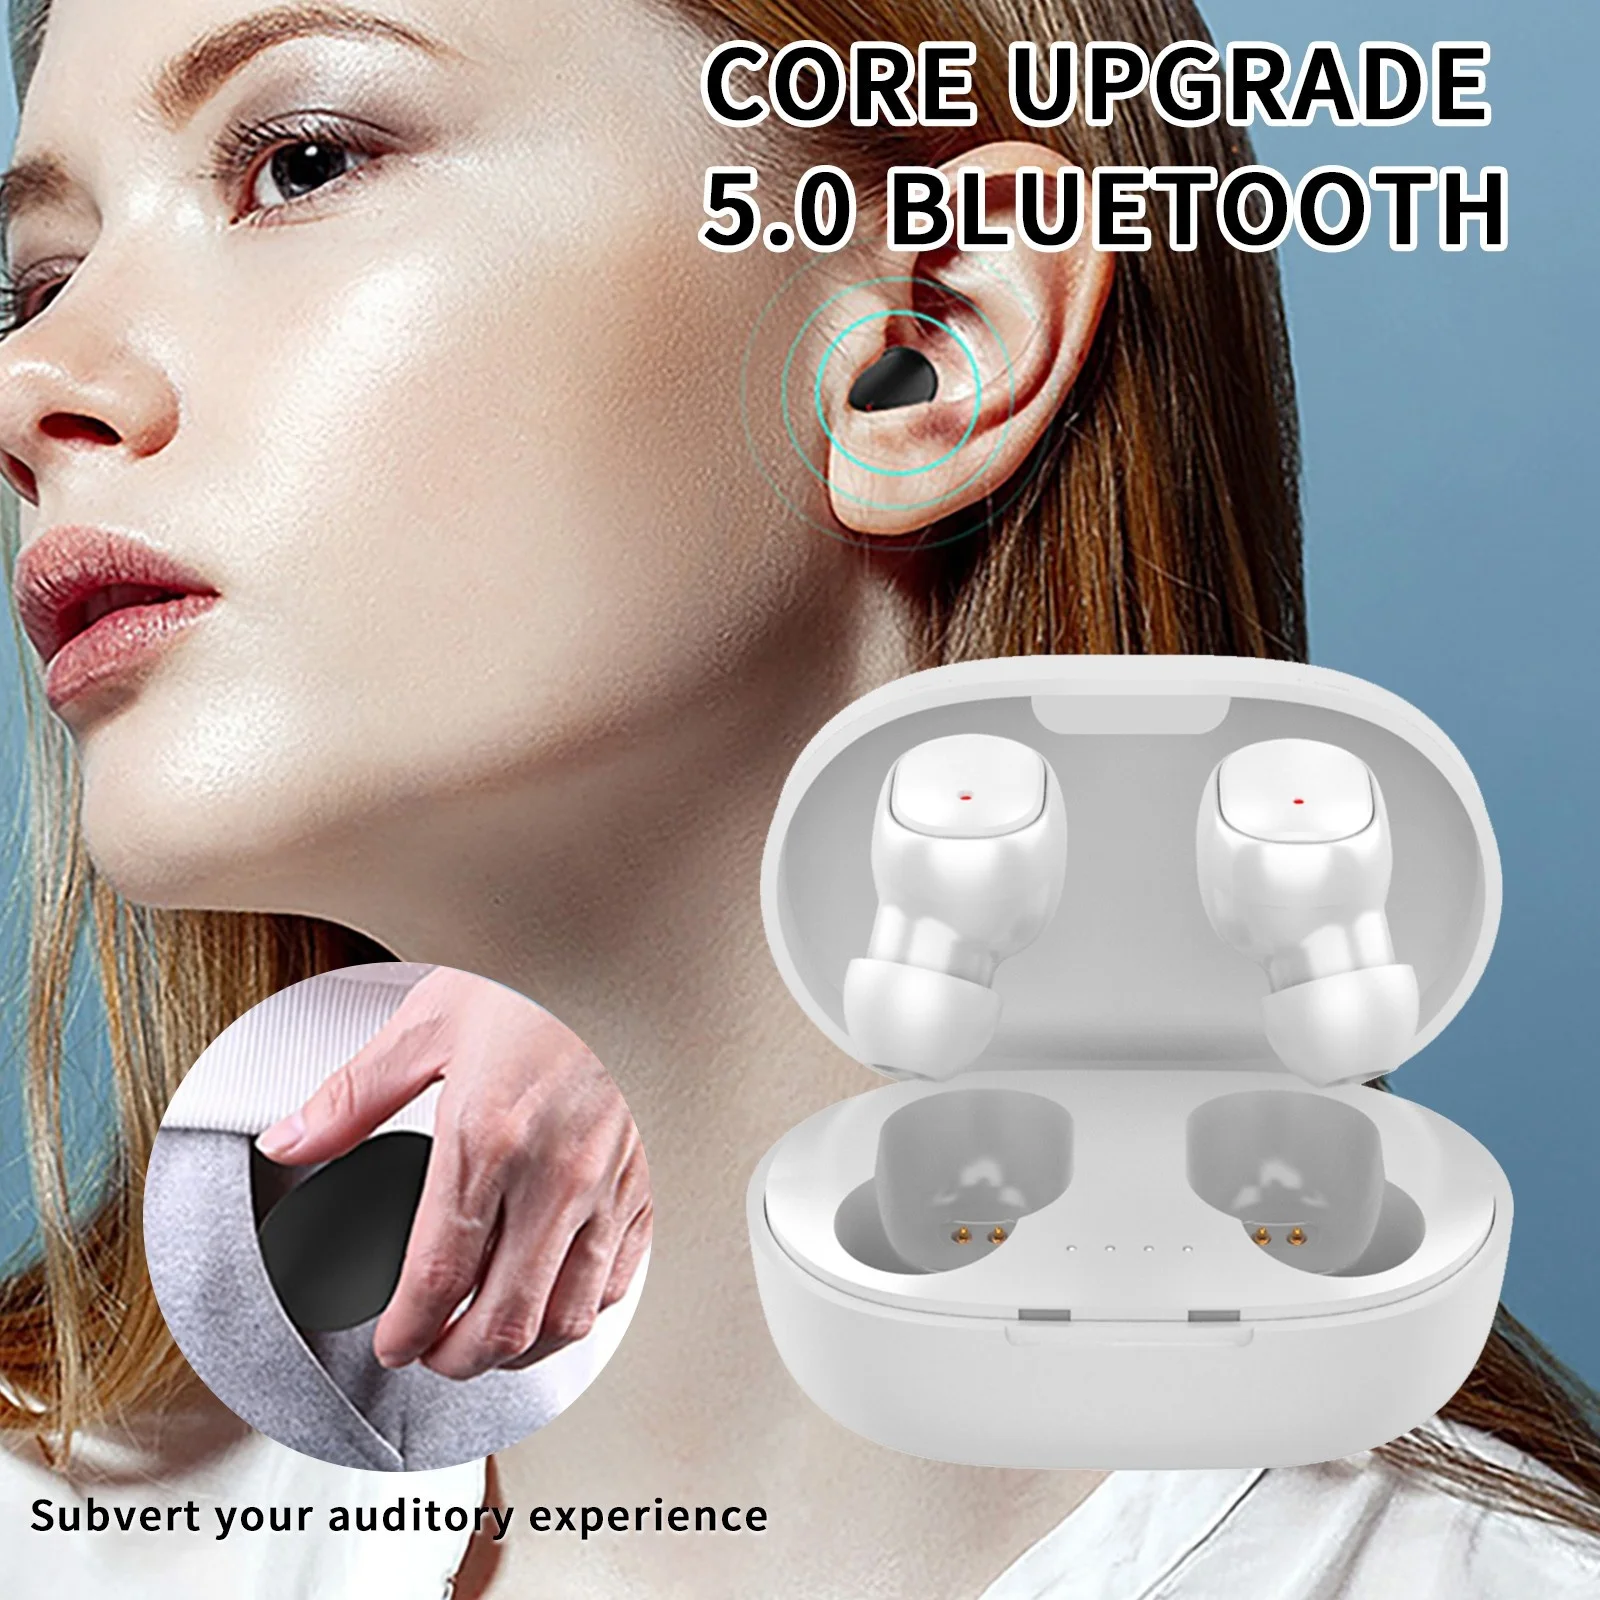 

A6S TWS Wireless Bluetooth Headset With Microphone Sports Earbuds Earphones Noise-cancelling Earplug Mini Headphones Hands-free